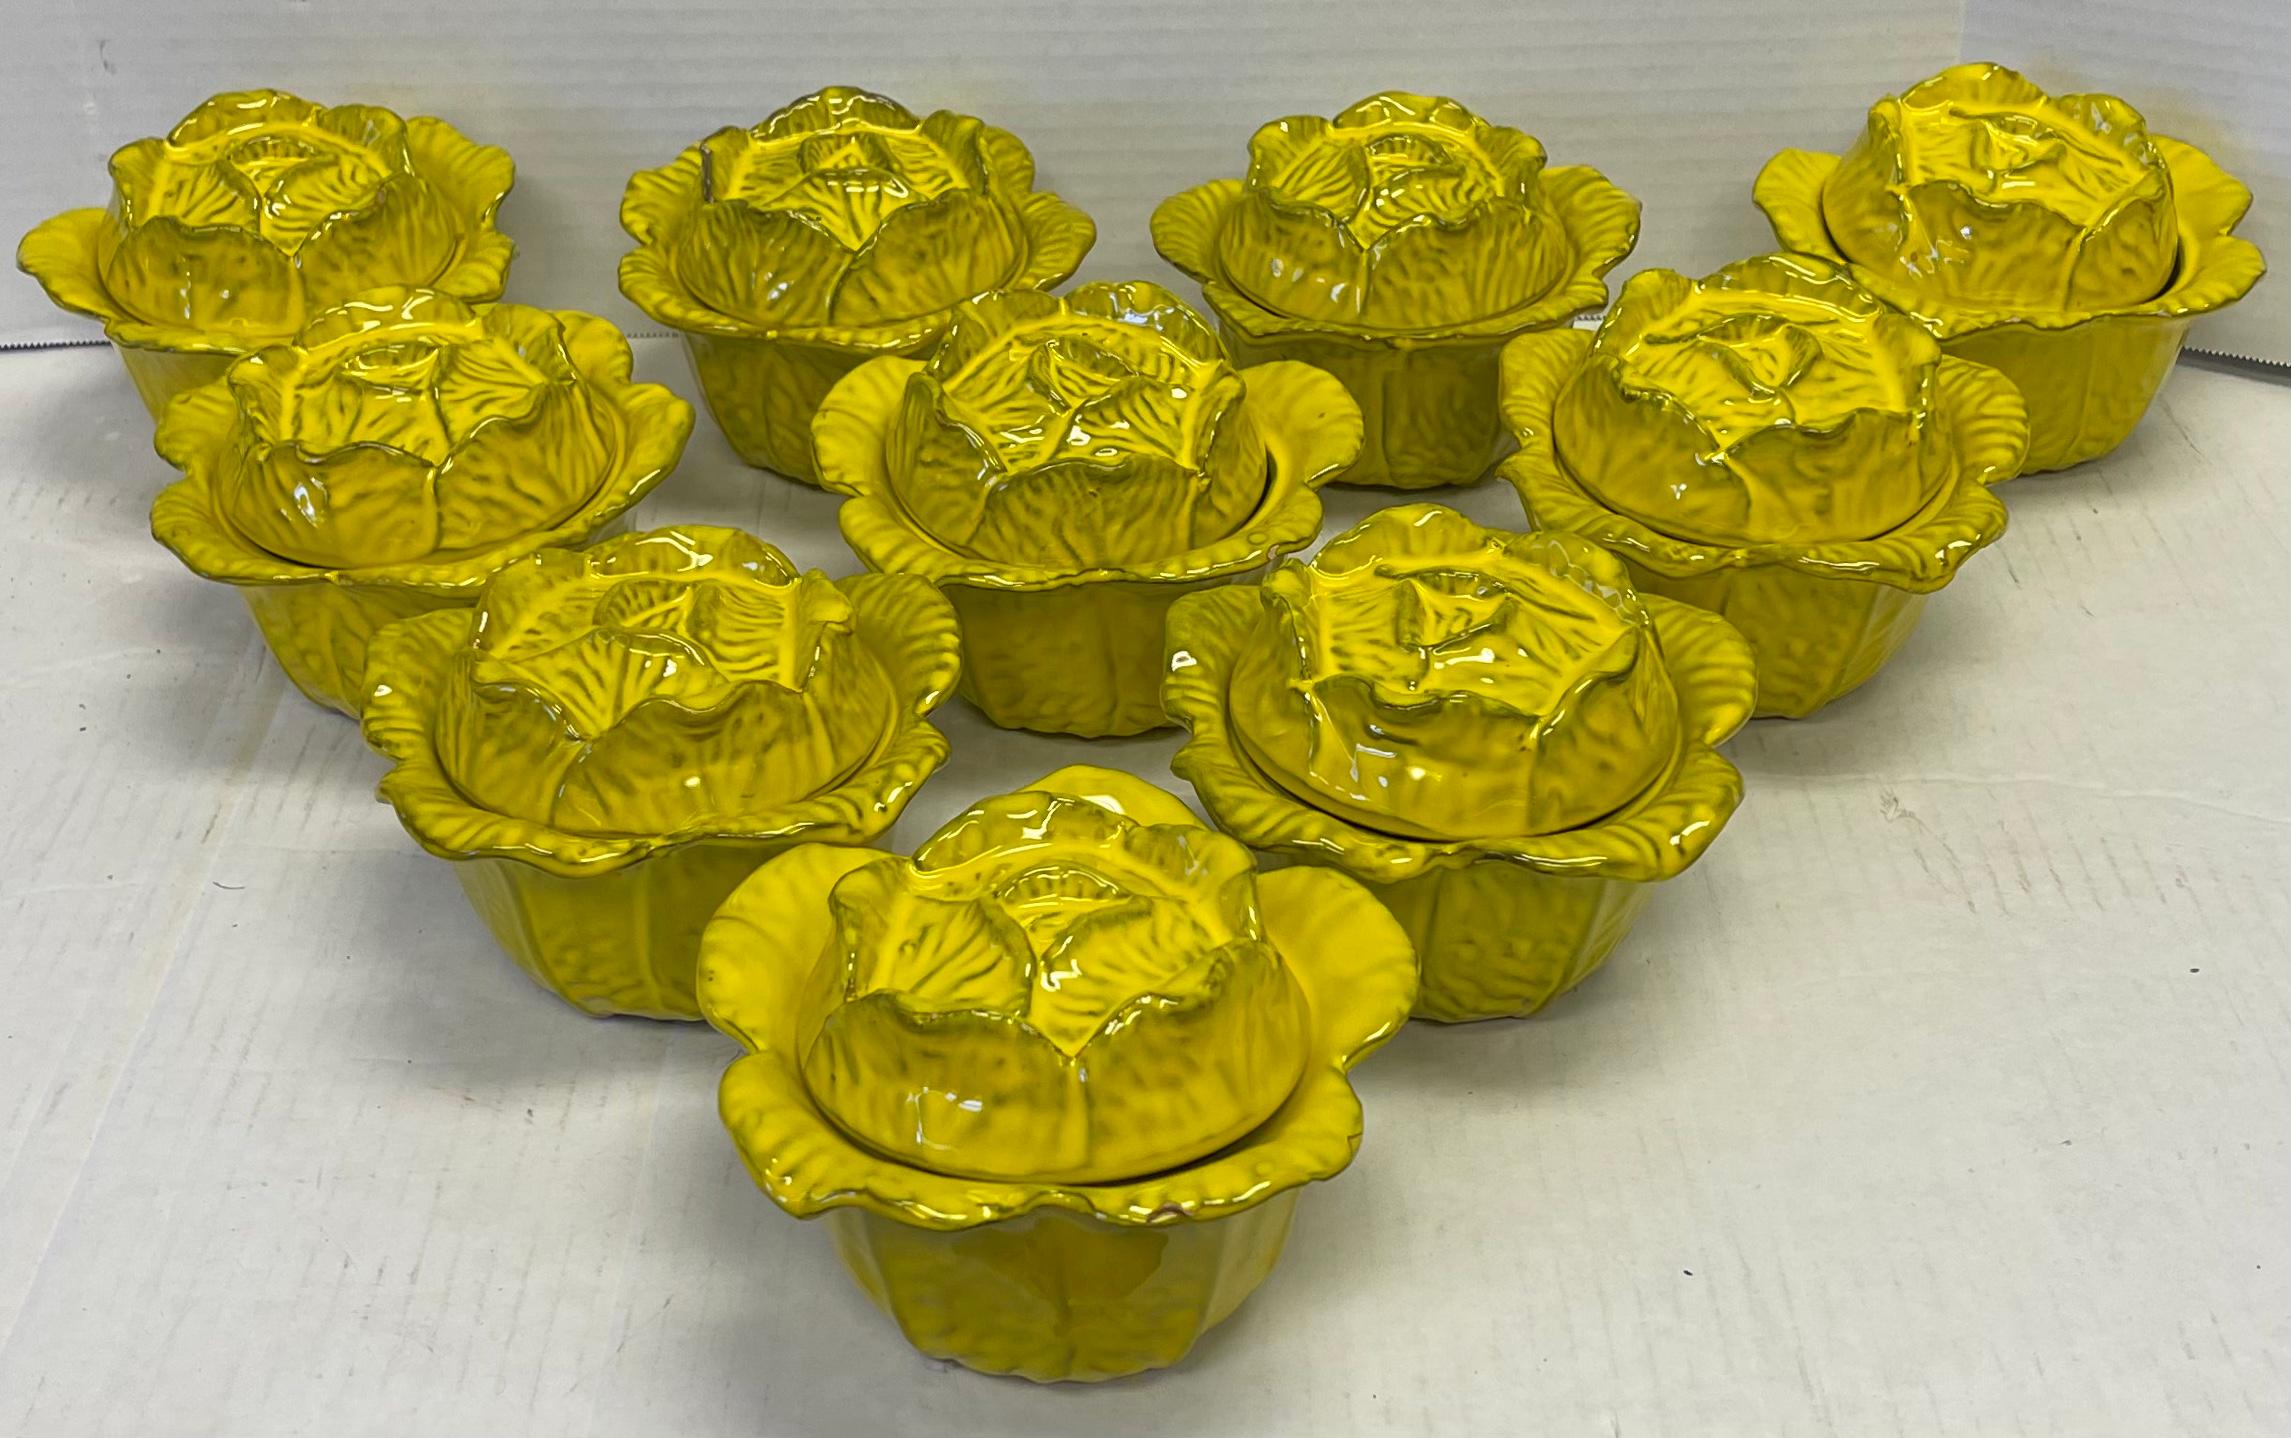 Italian Yellow Majolica Terracotta Pottery Cabbage Form Lidded Bowls, Set of 10 For Sale 2